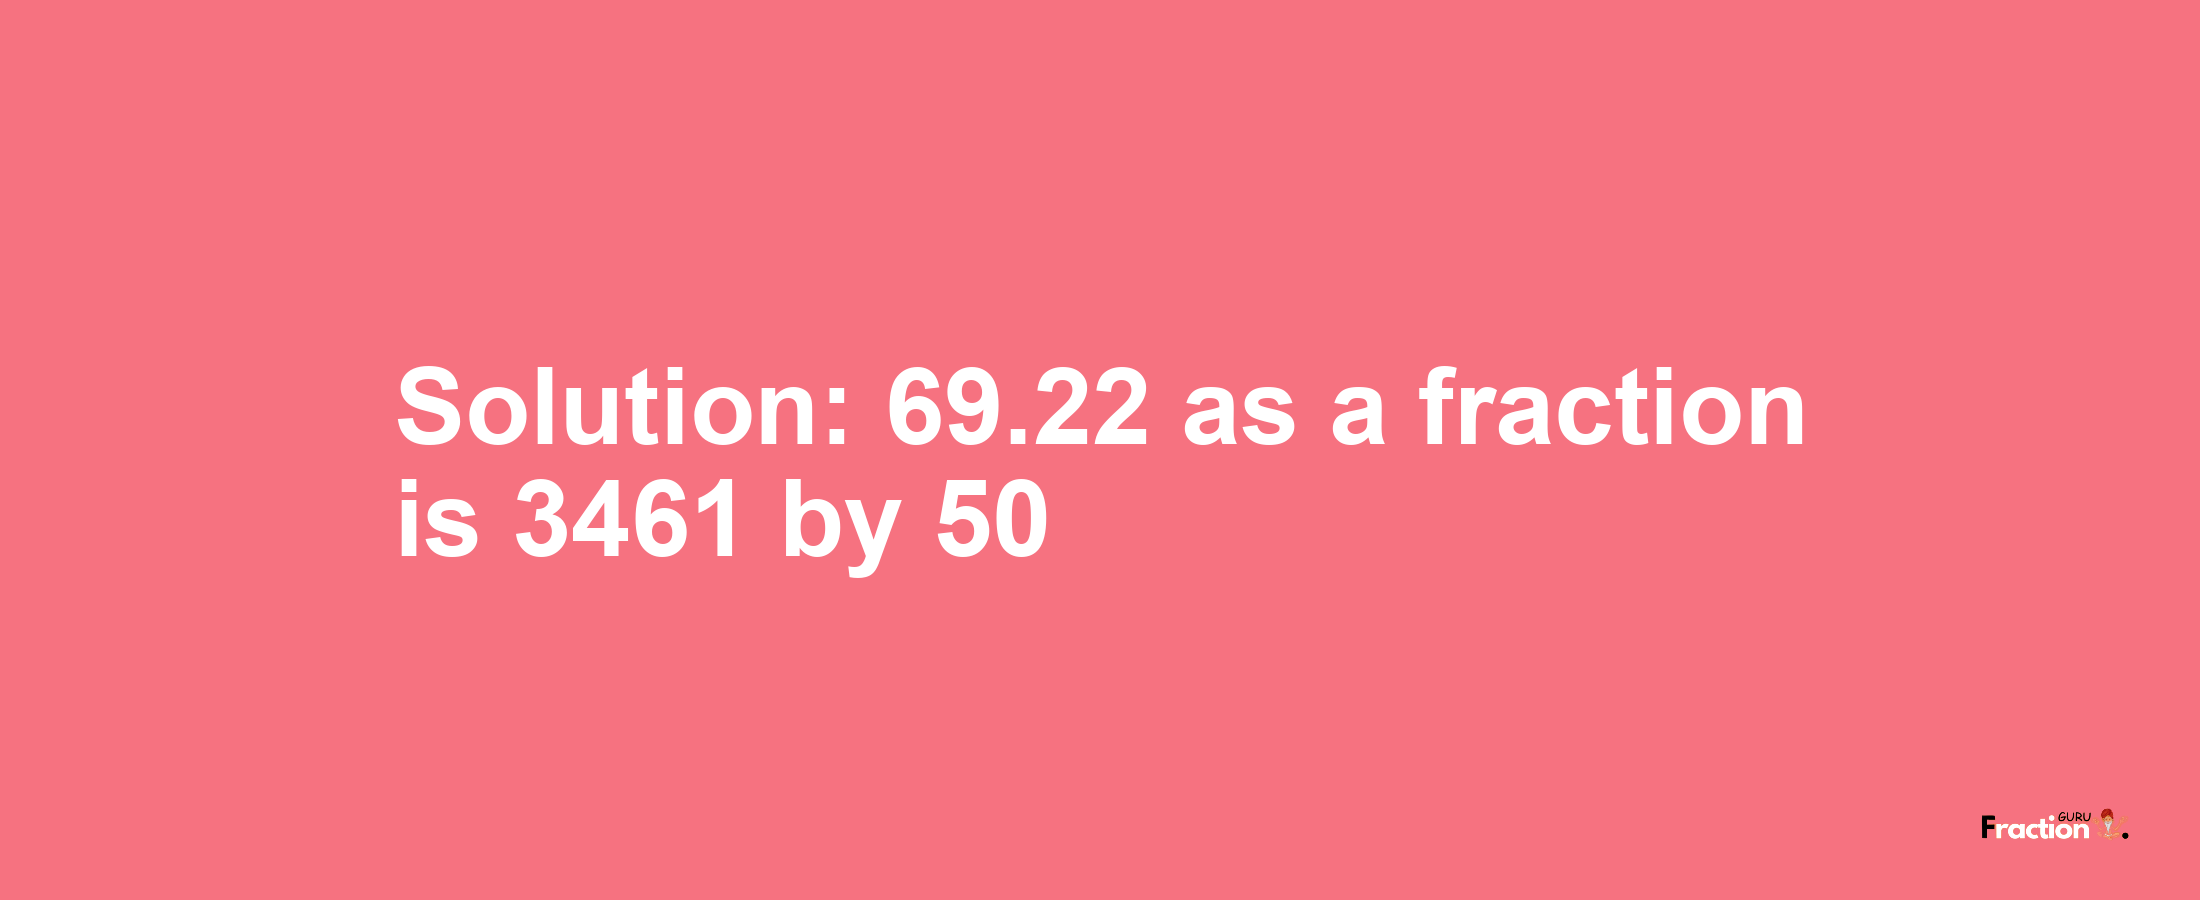 Solution:69.22 as a fraction is 3461/50